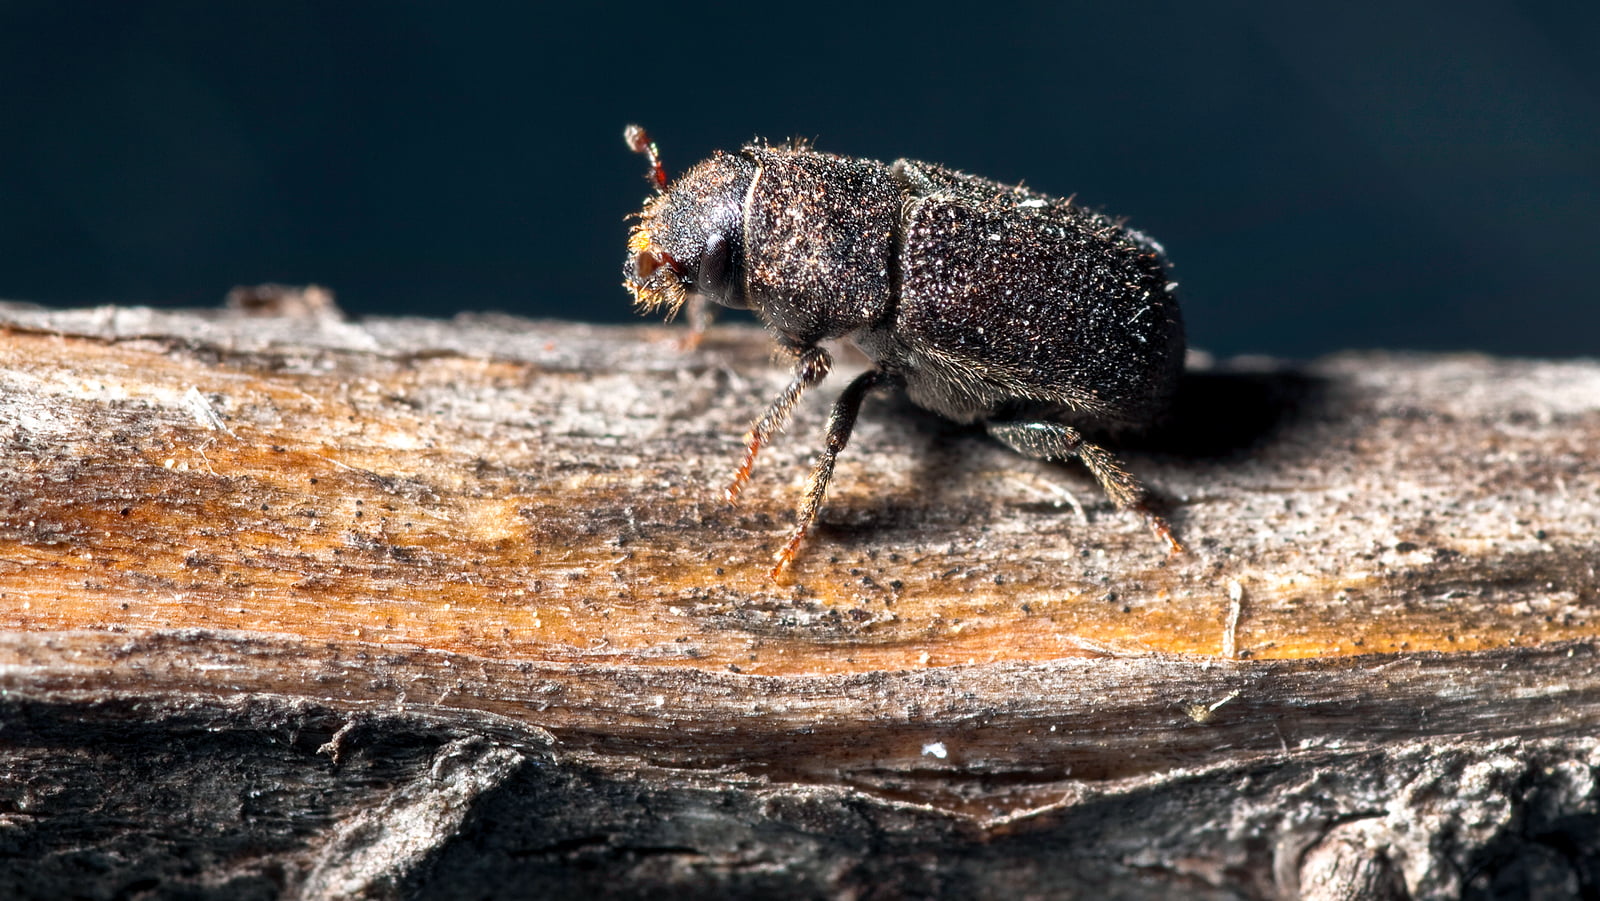 Researcher Rashaduz Zaman has provided new insight into how the mountain pine beetle and its relationship with beneficial fungi are influenced by climate change. (Photo: Getty Images)